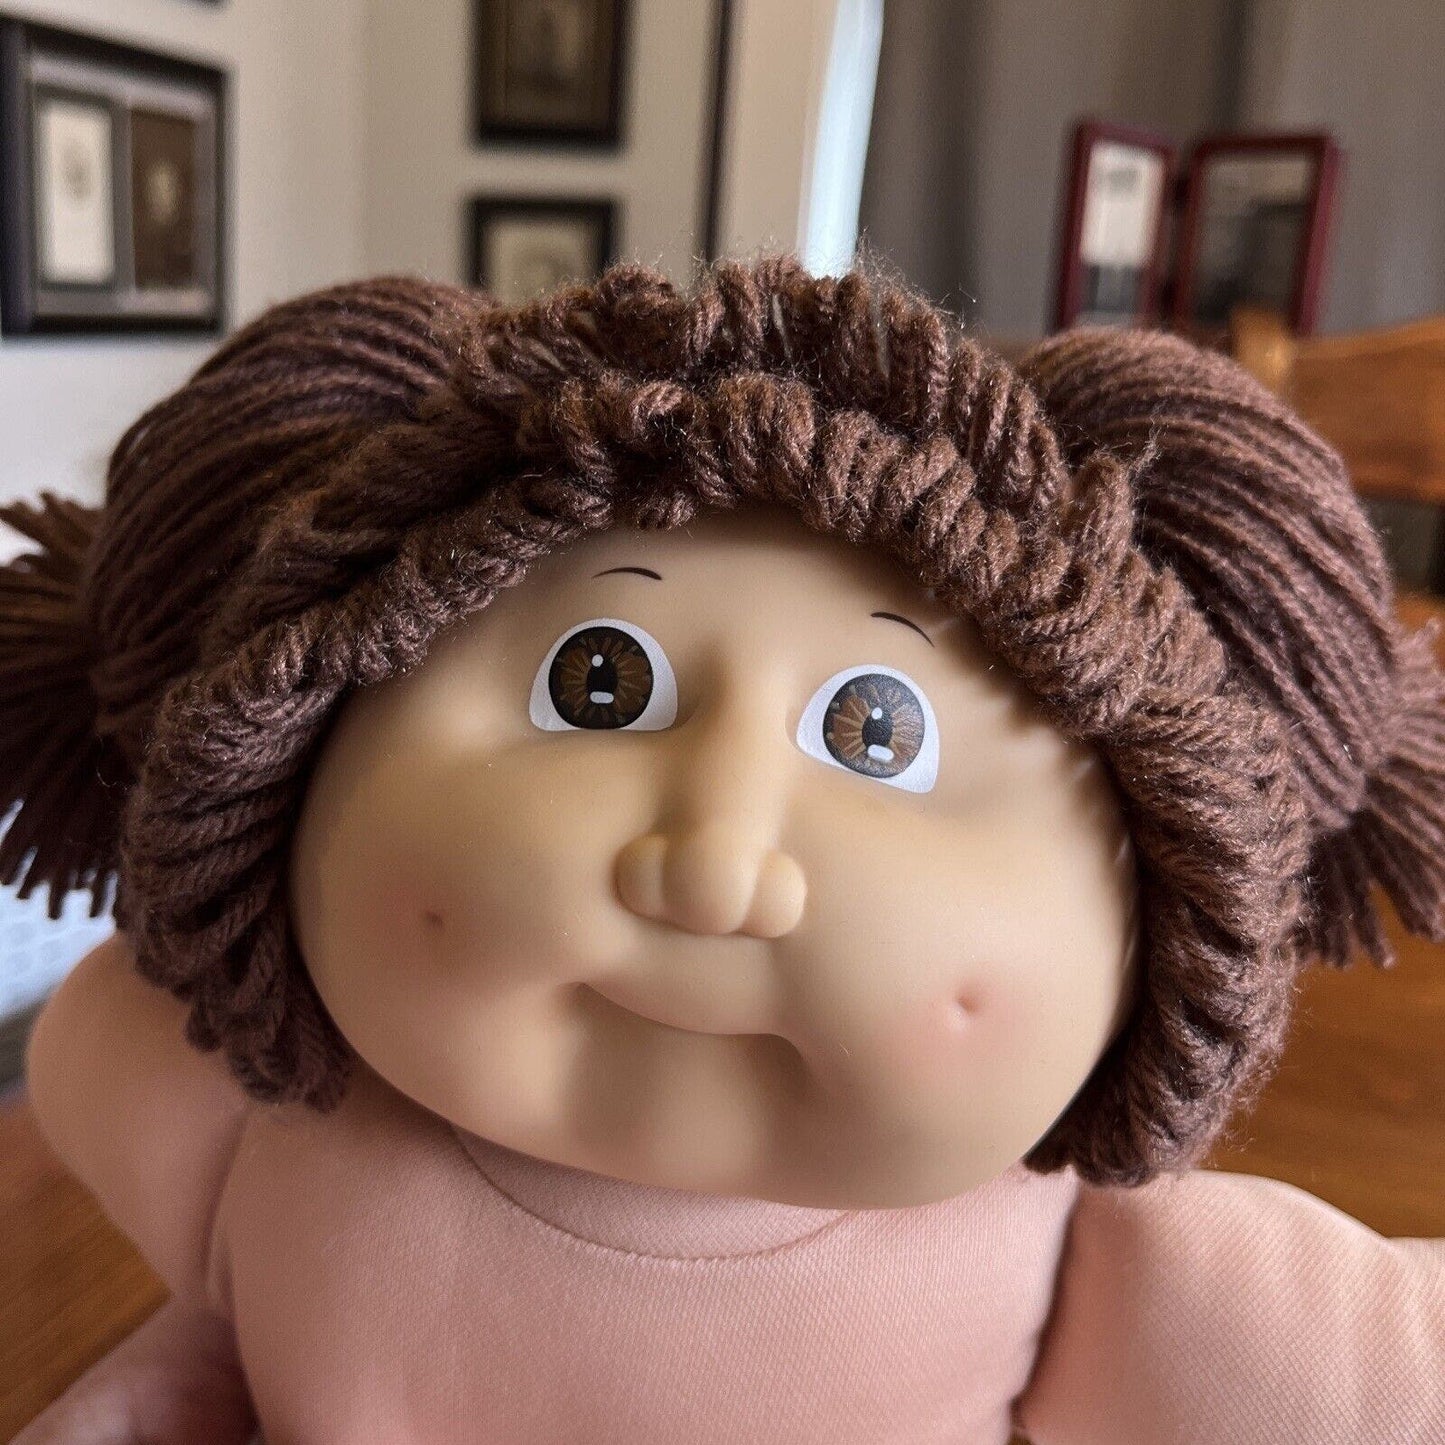 1980s Cabbage Patch Kid Brown Pigtails & Eyes IC1 HM2 Yellow & Red Chicken Dress